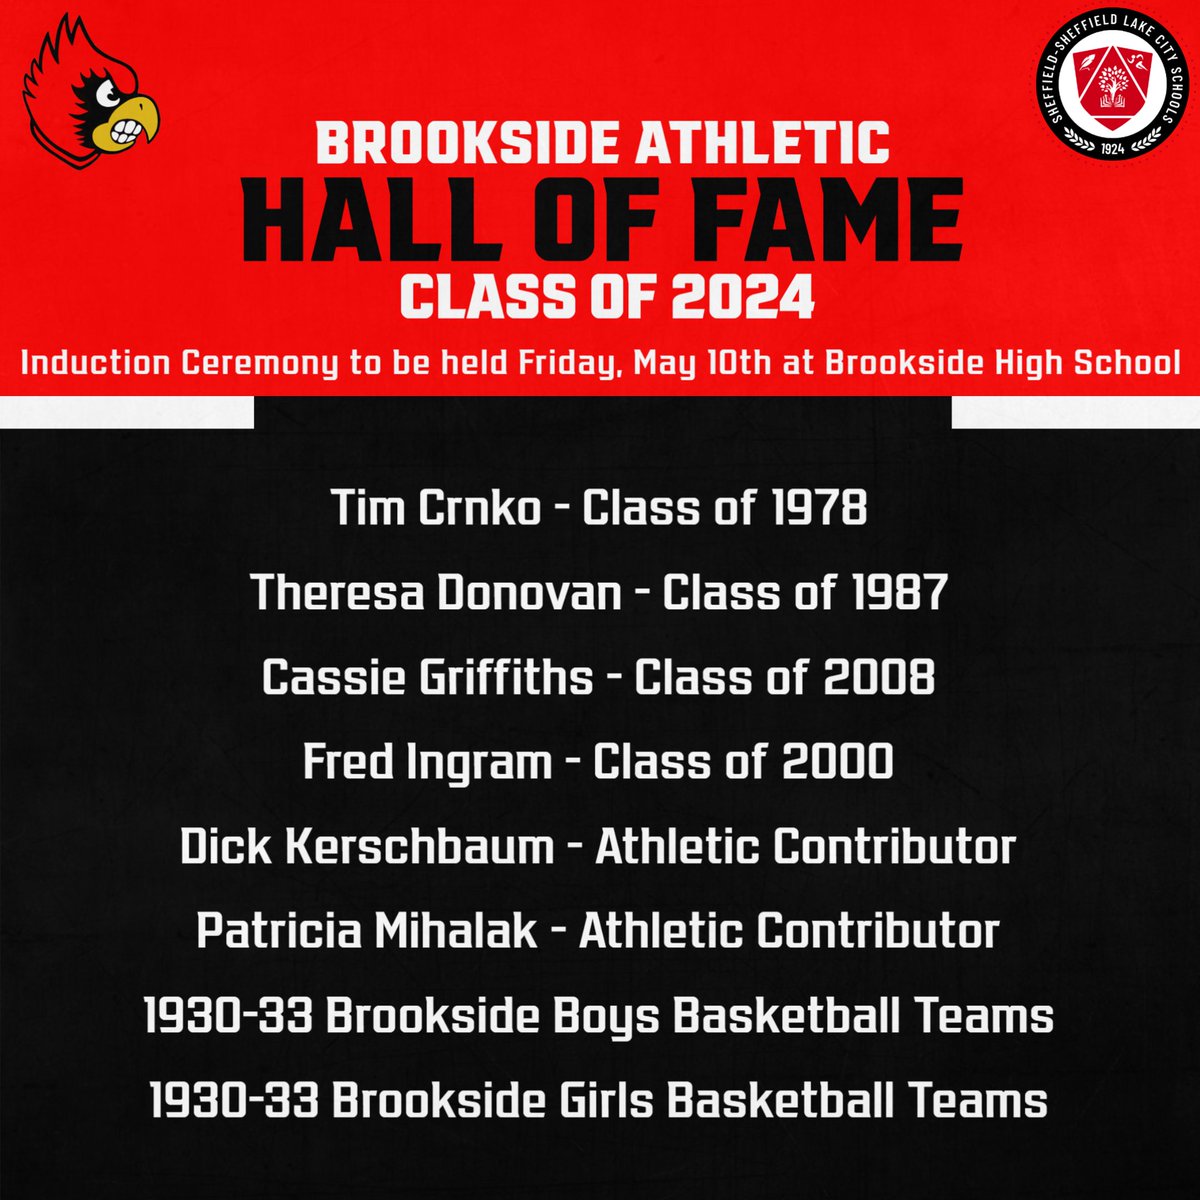 The Brookside Athletic Hall of Fame Committee is pleased to announce the 2024 class to be inducted on Friday, May 10th. For more information, please visit: brooksidecardinals.com/news/91809